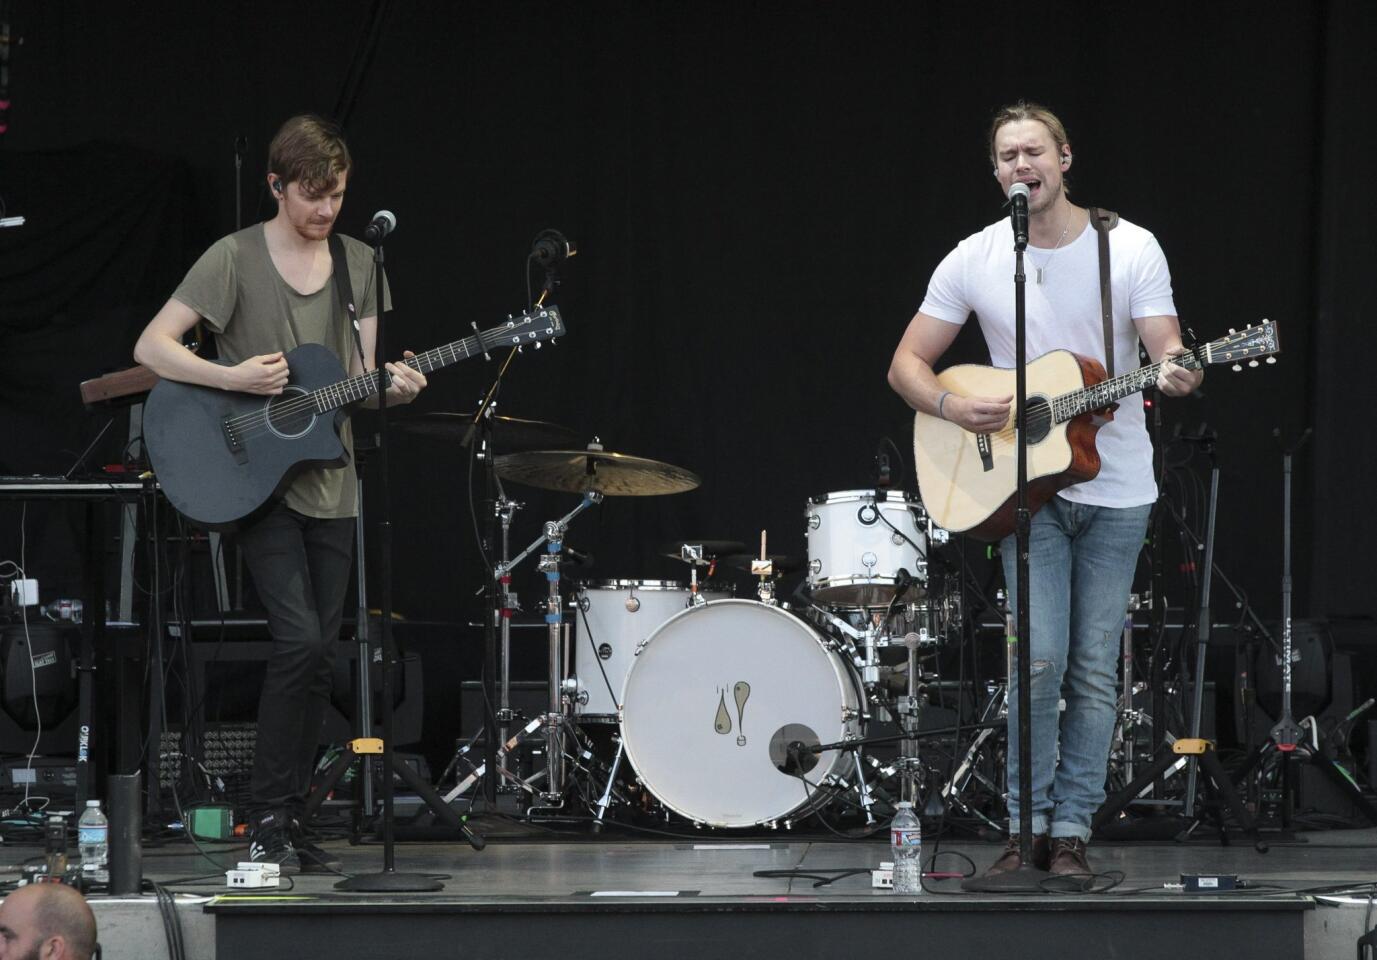 Chord Overstreet performs before Nick Jonas and Demi Lovato at the Sleep Train Amphitheater.